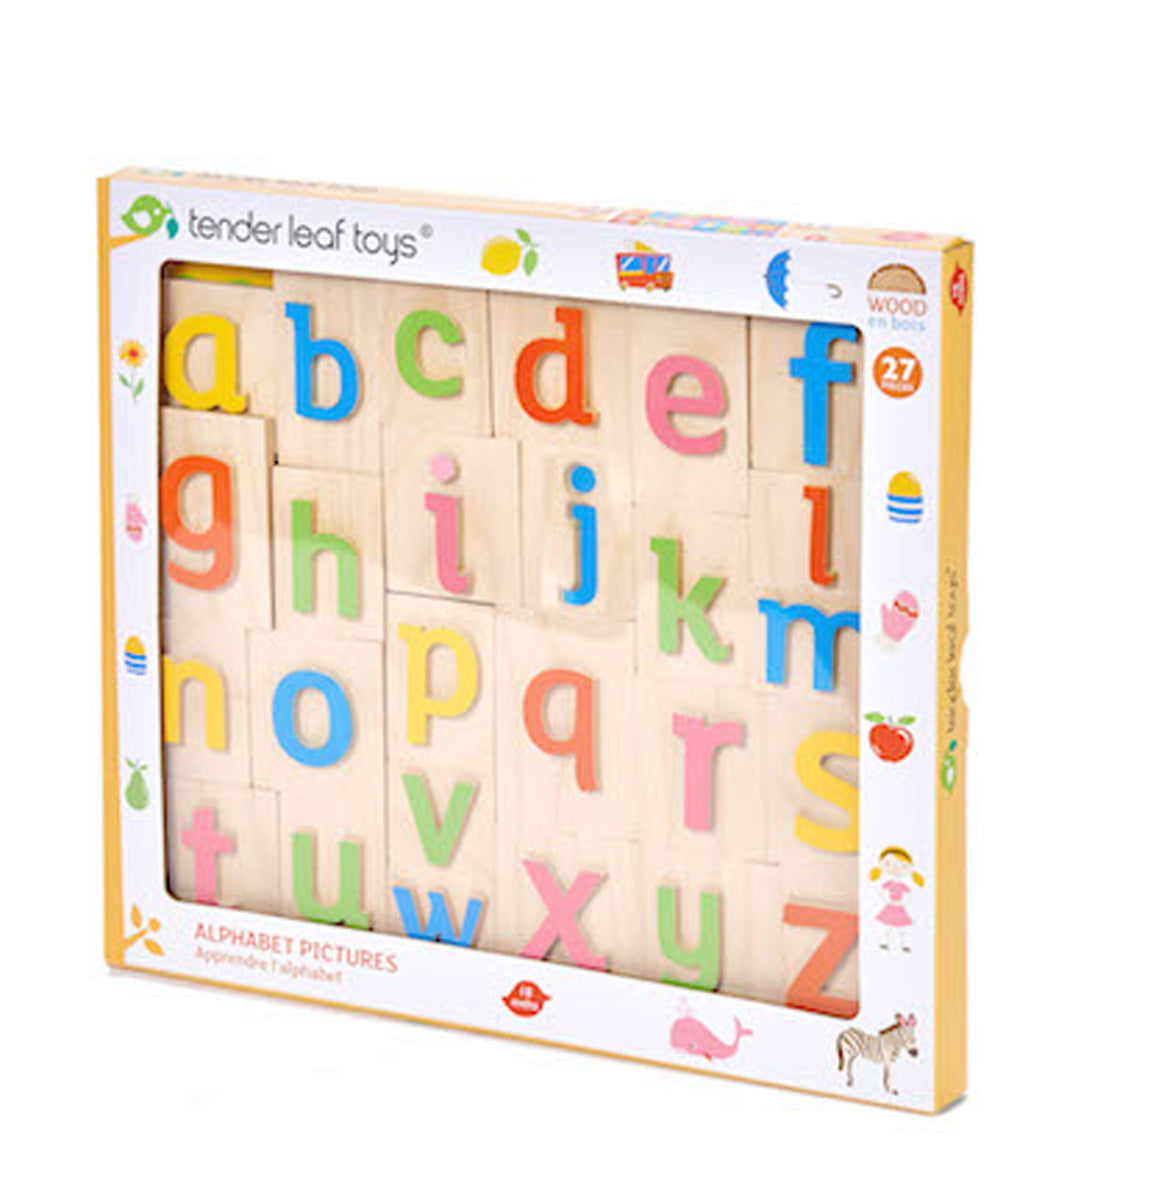 Box contains wooden alphabet game for toddlers and young children.